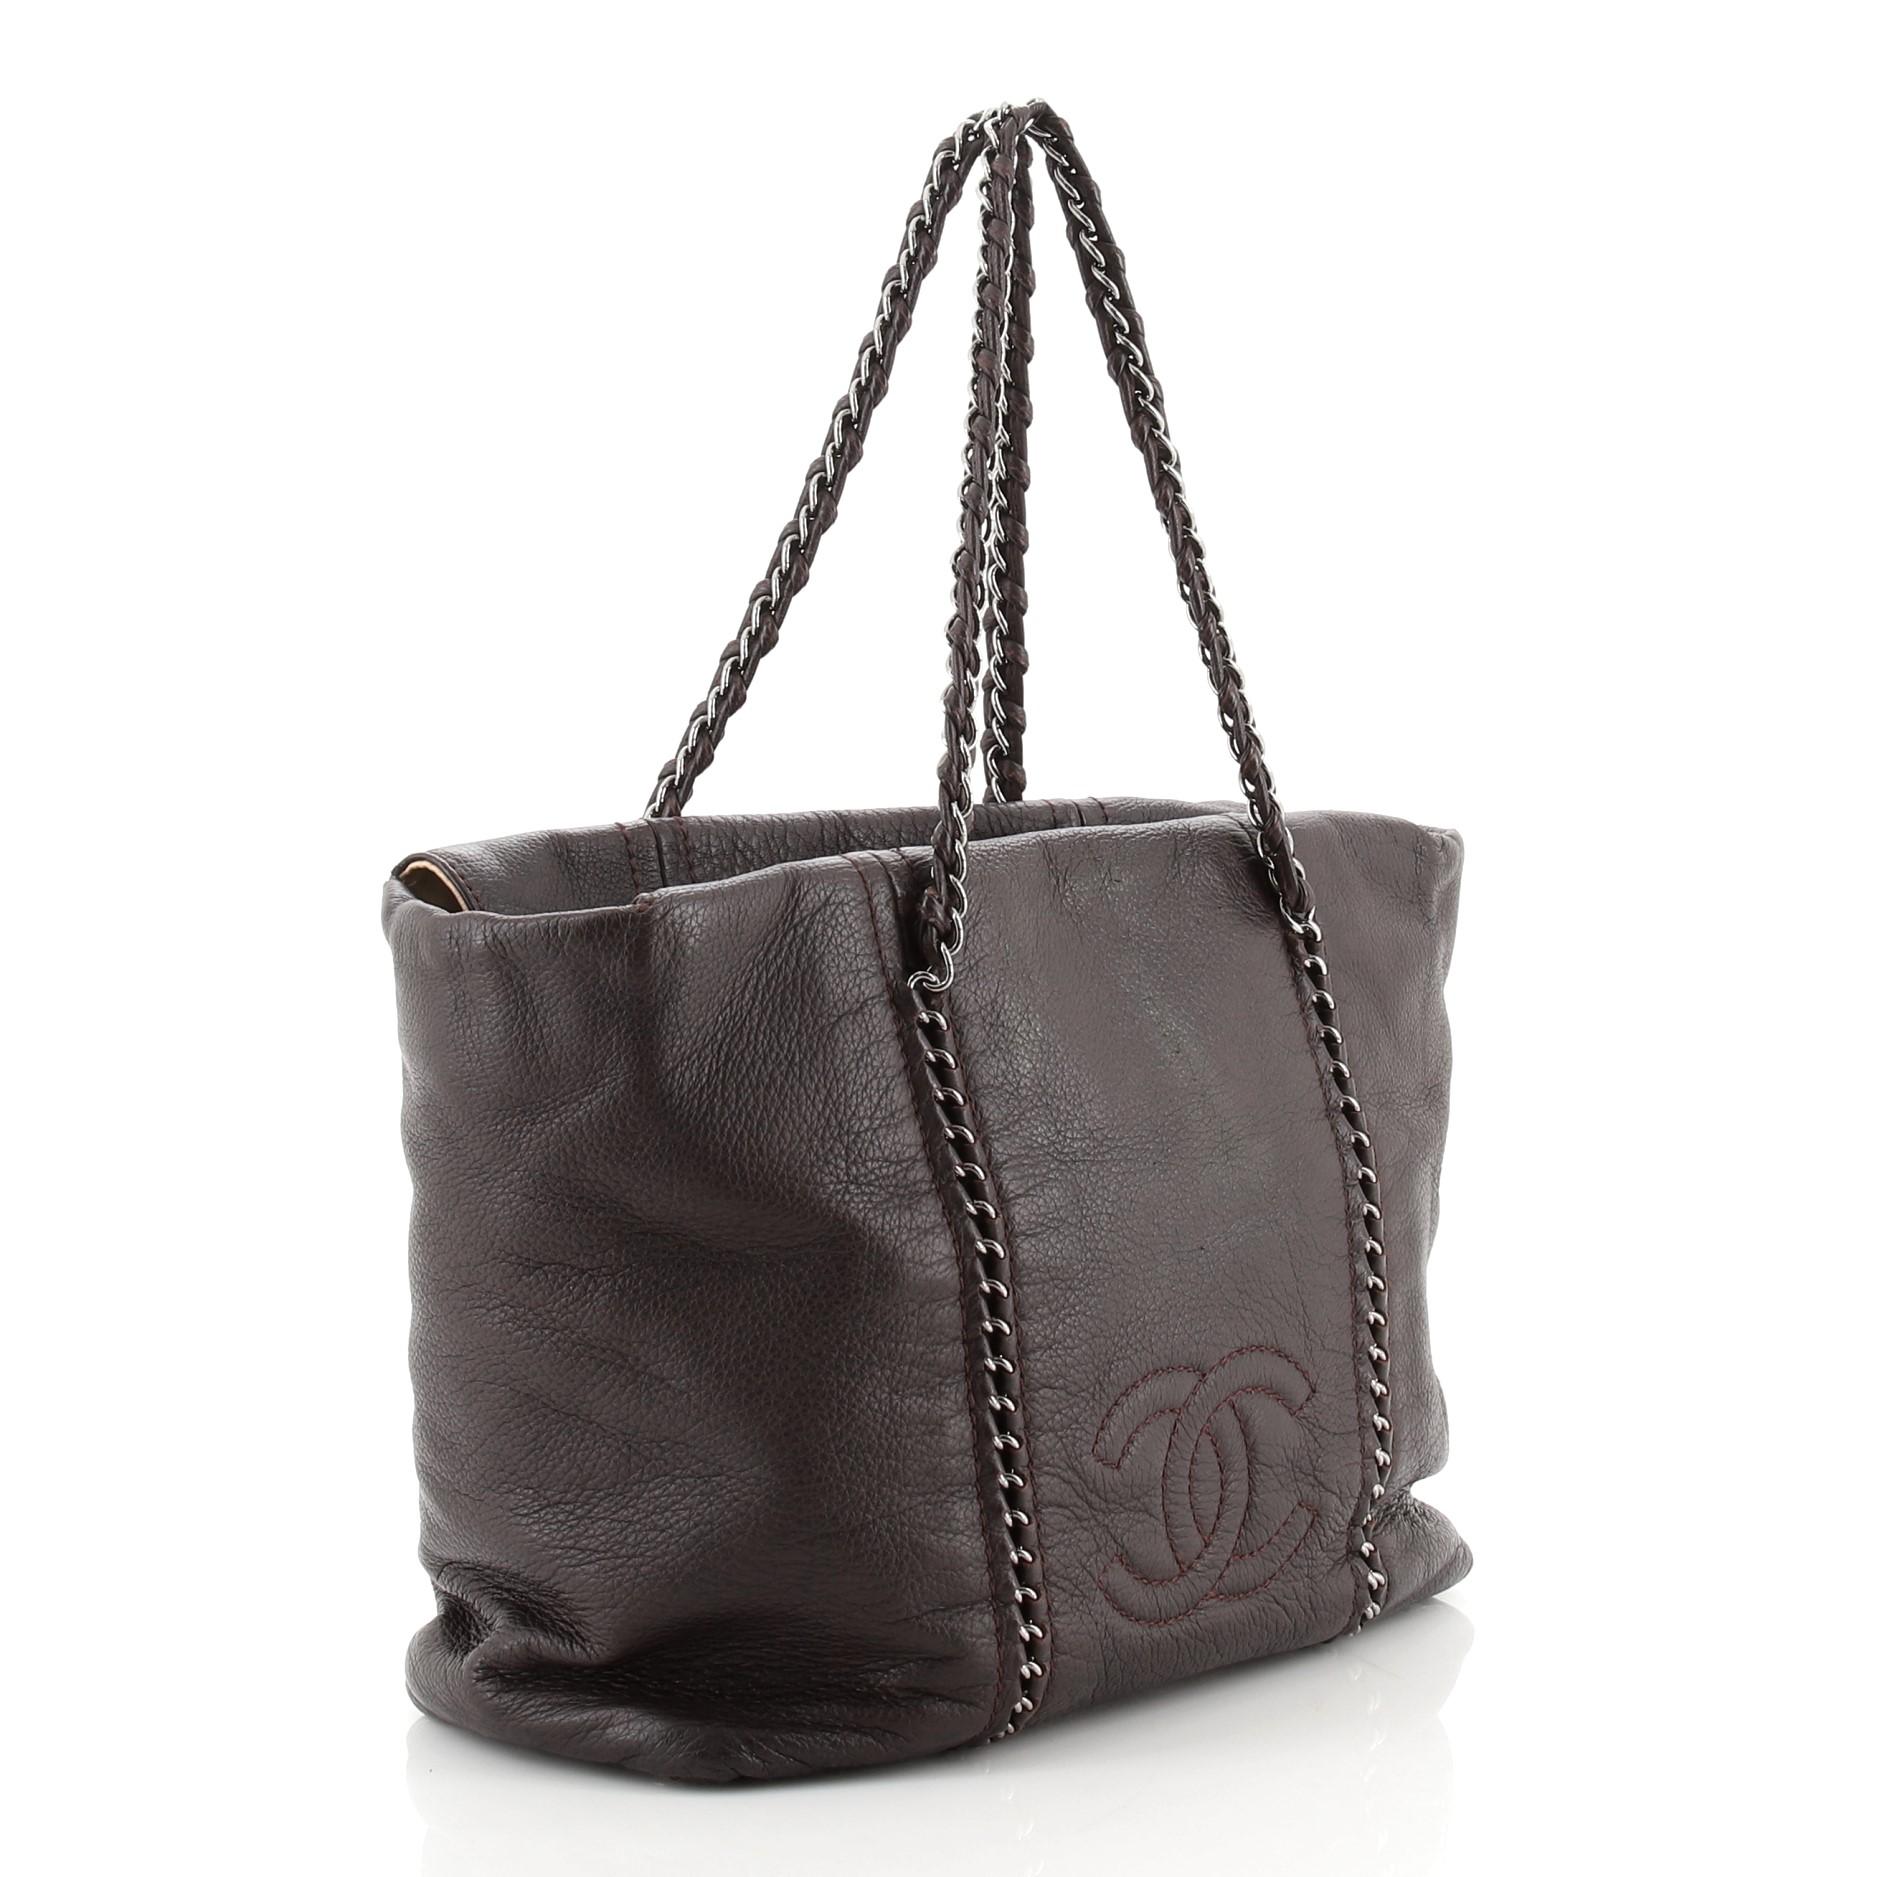 Chanel Luxe Ligne Zip Top Tote Calfskin Large
Purple Calfskin

Condition Details: Creasing and wear on exterior, handles and in interior, small stains in interior, scratches on hardware.

59075MSC

Height 11